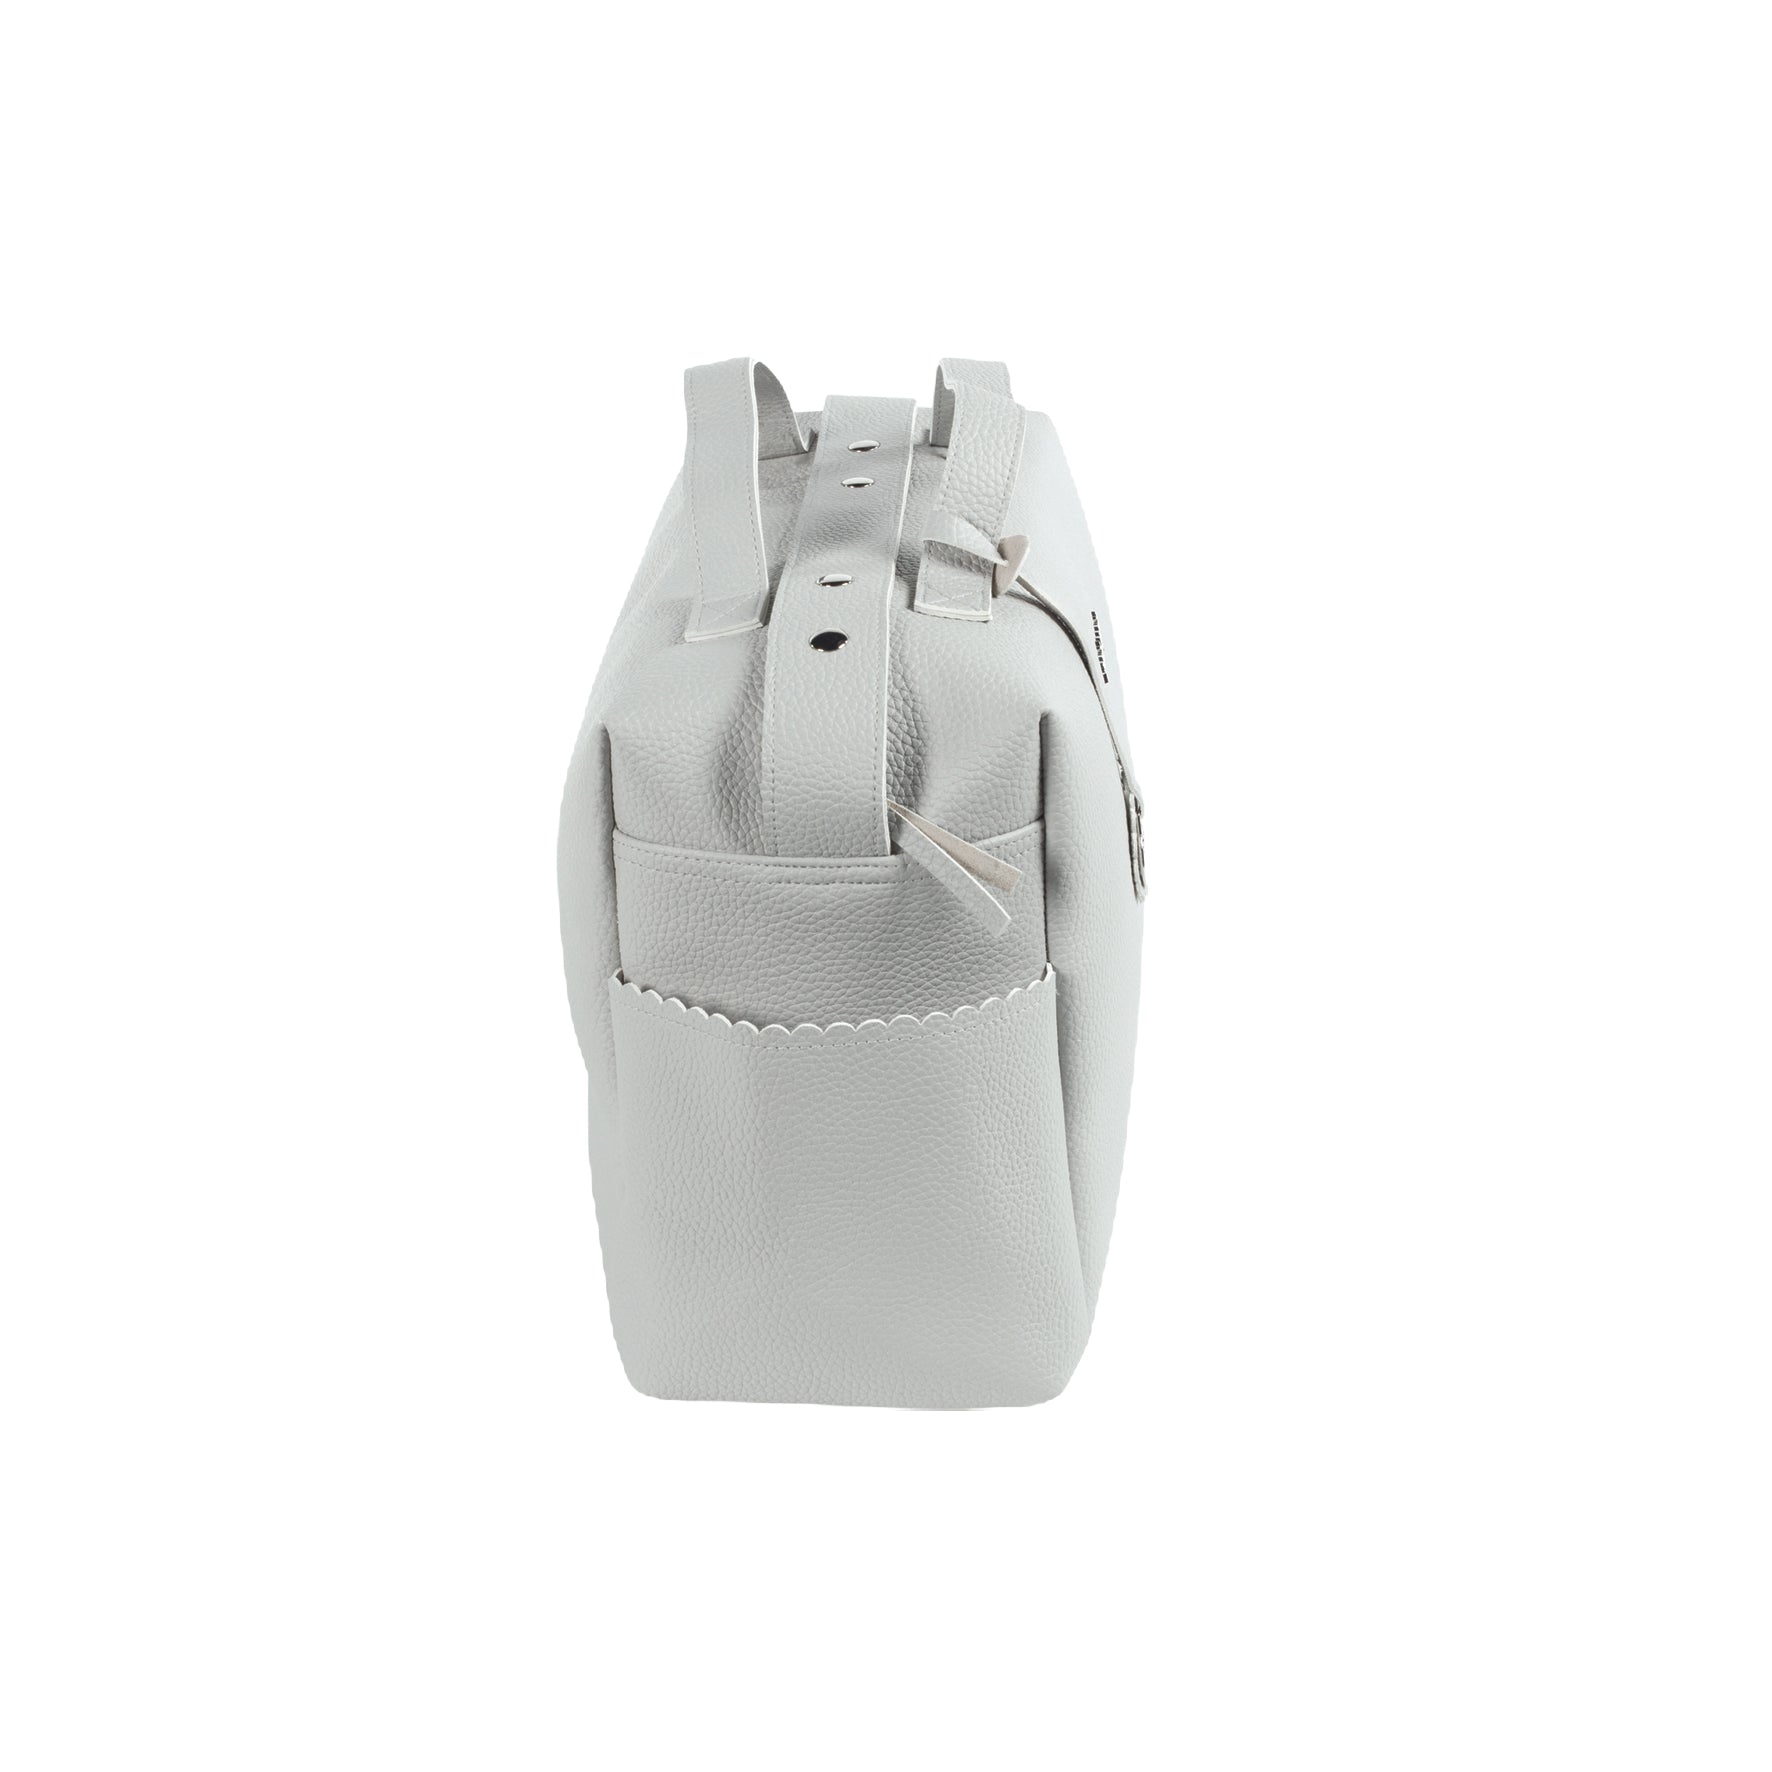 Pasito a Pasito Biscuit Grey Diaper Changing Bag